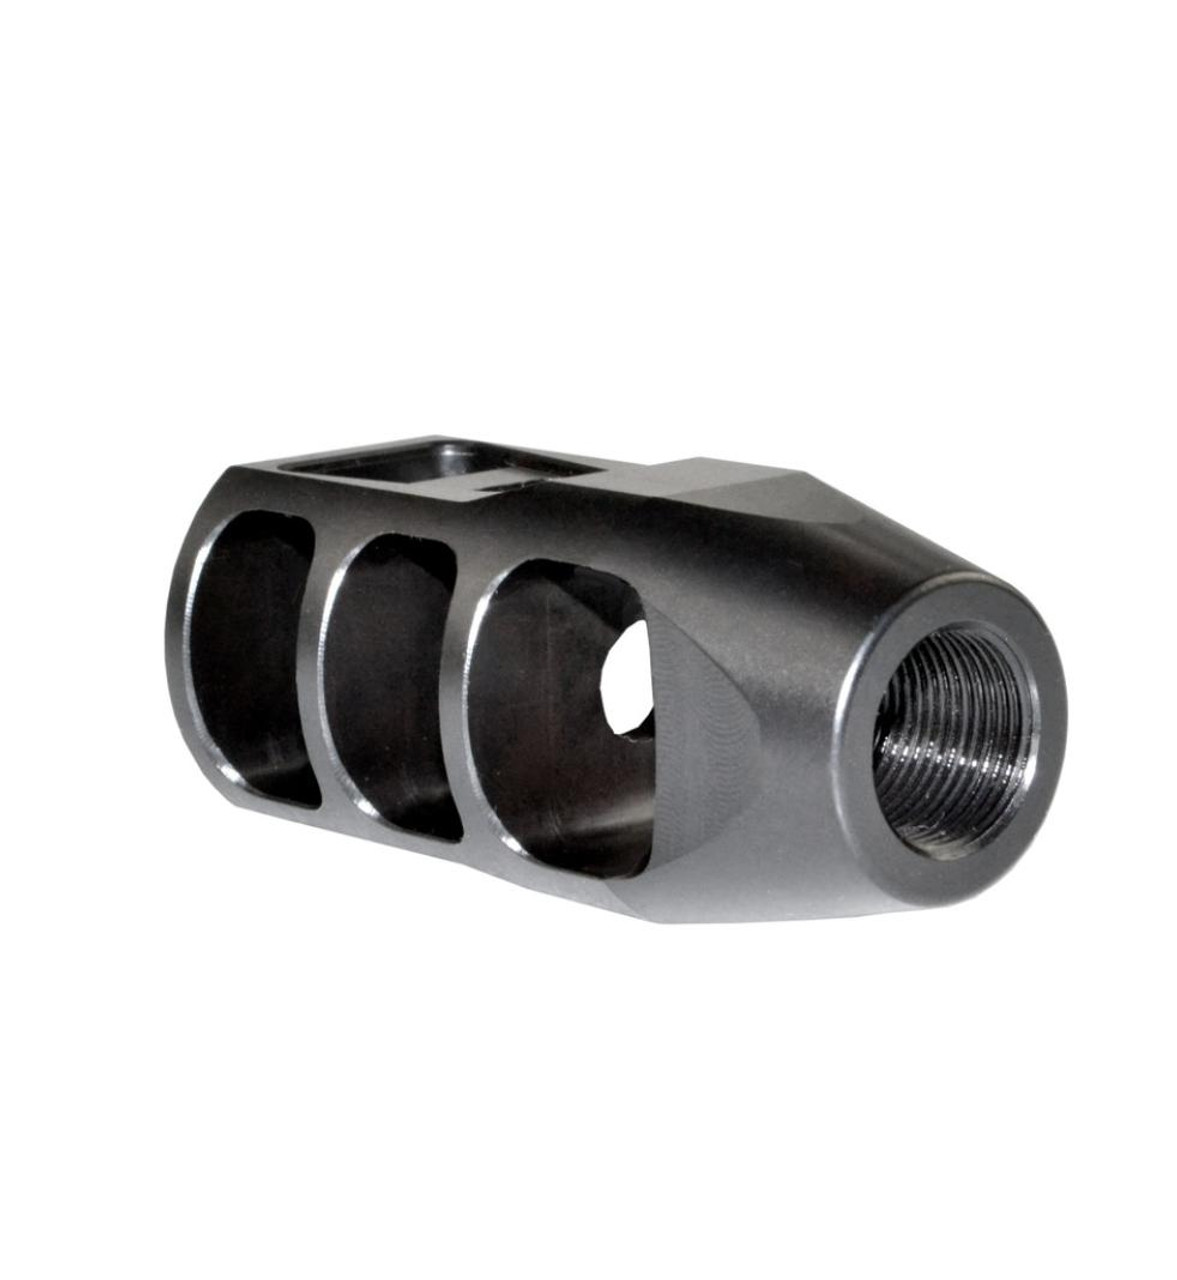 MCS 49/64”x20 Muzzle Brake for .50 Beowulf, Black 